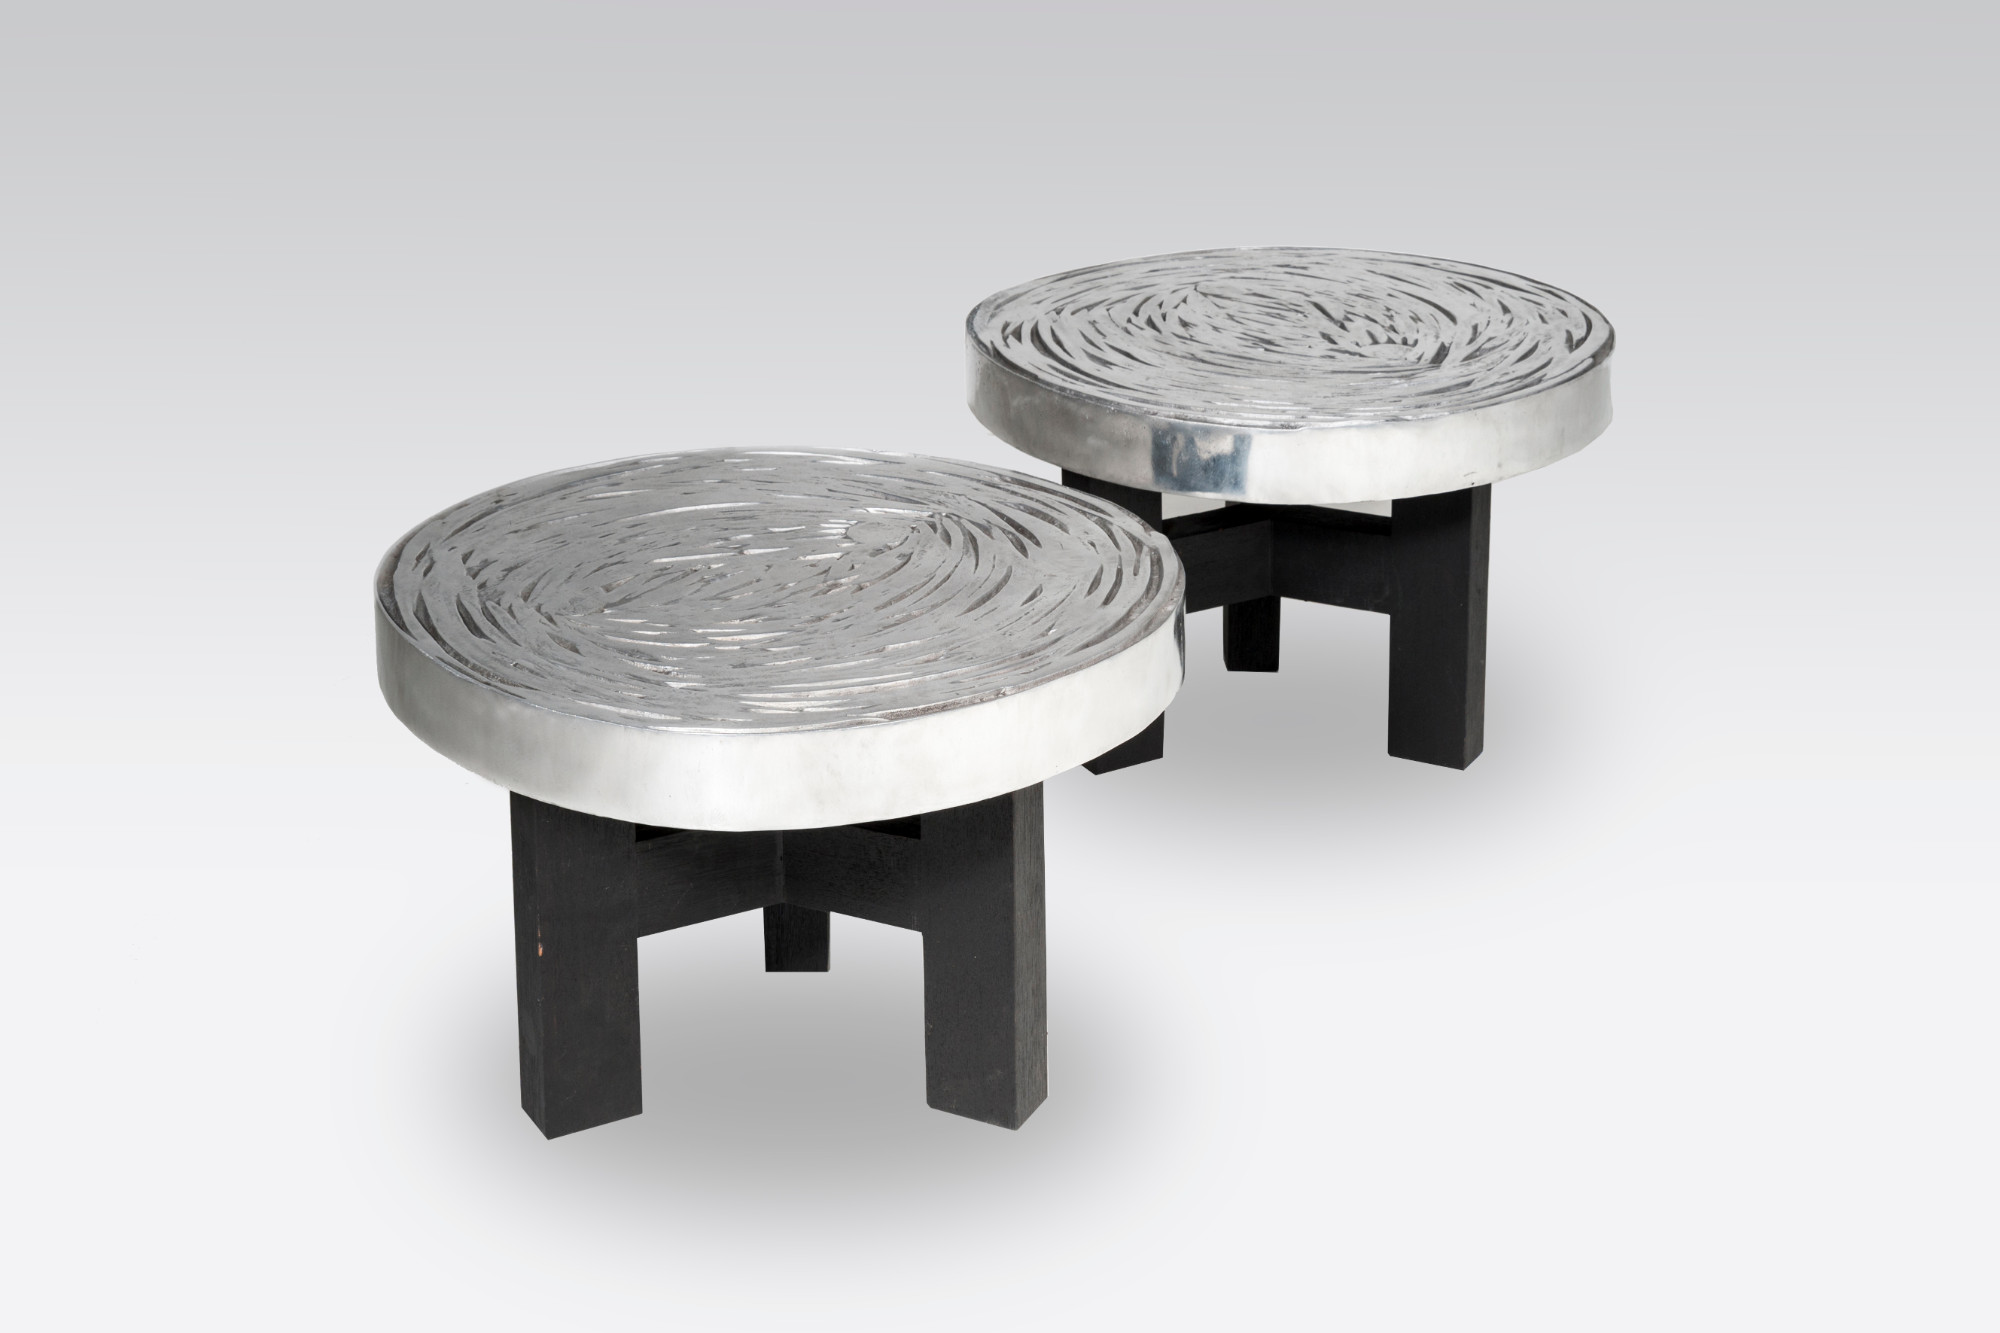 Pair of side table aluminum by Ado Chale